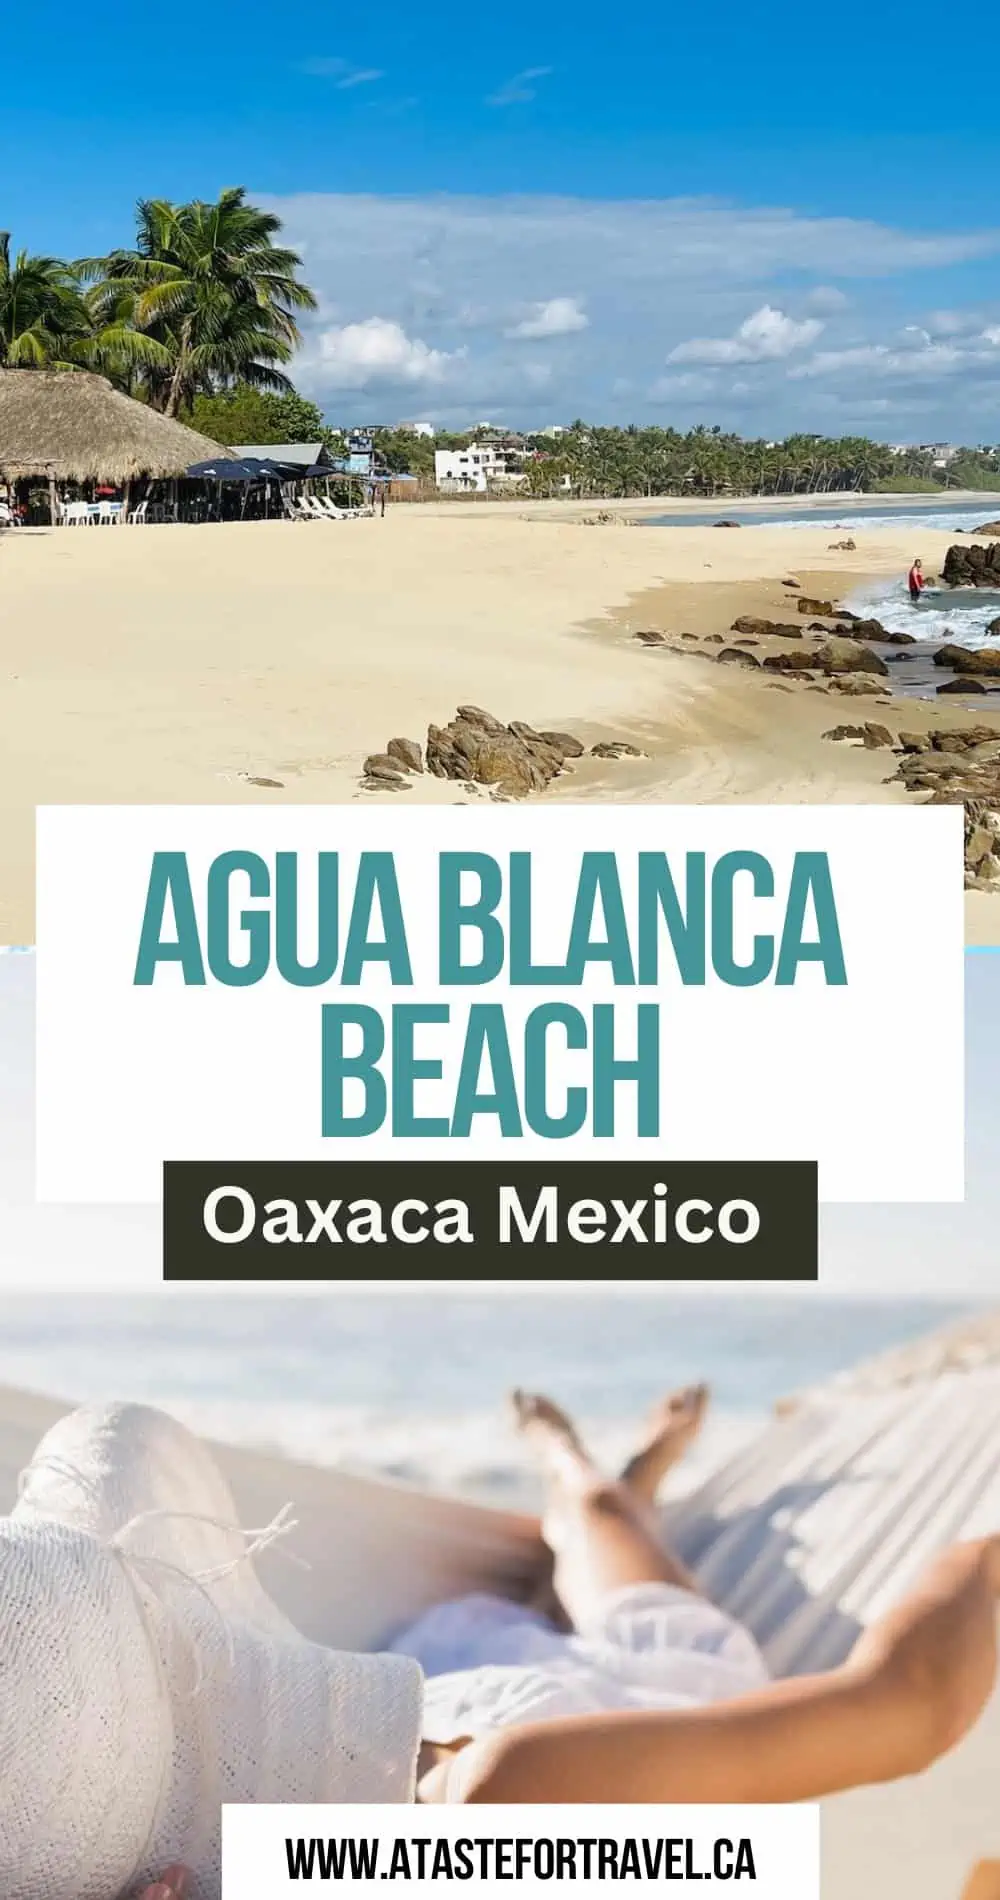 A collage of a hammock and a secluded beach in Oaxaca.  